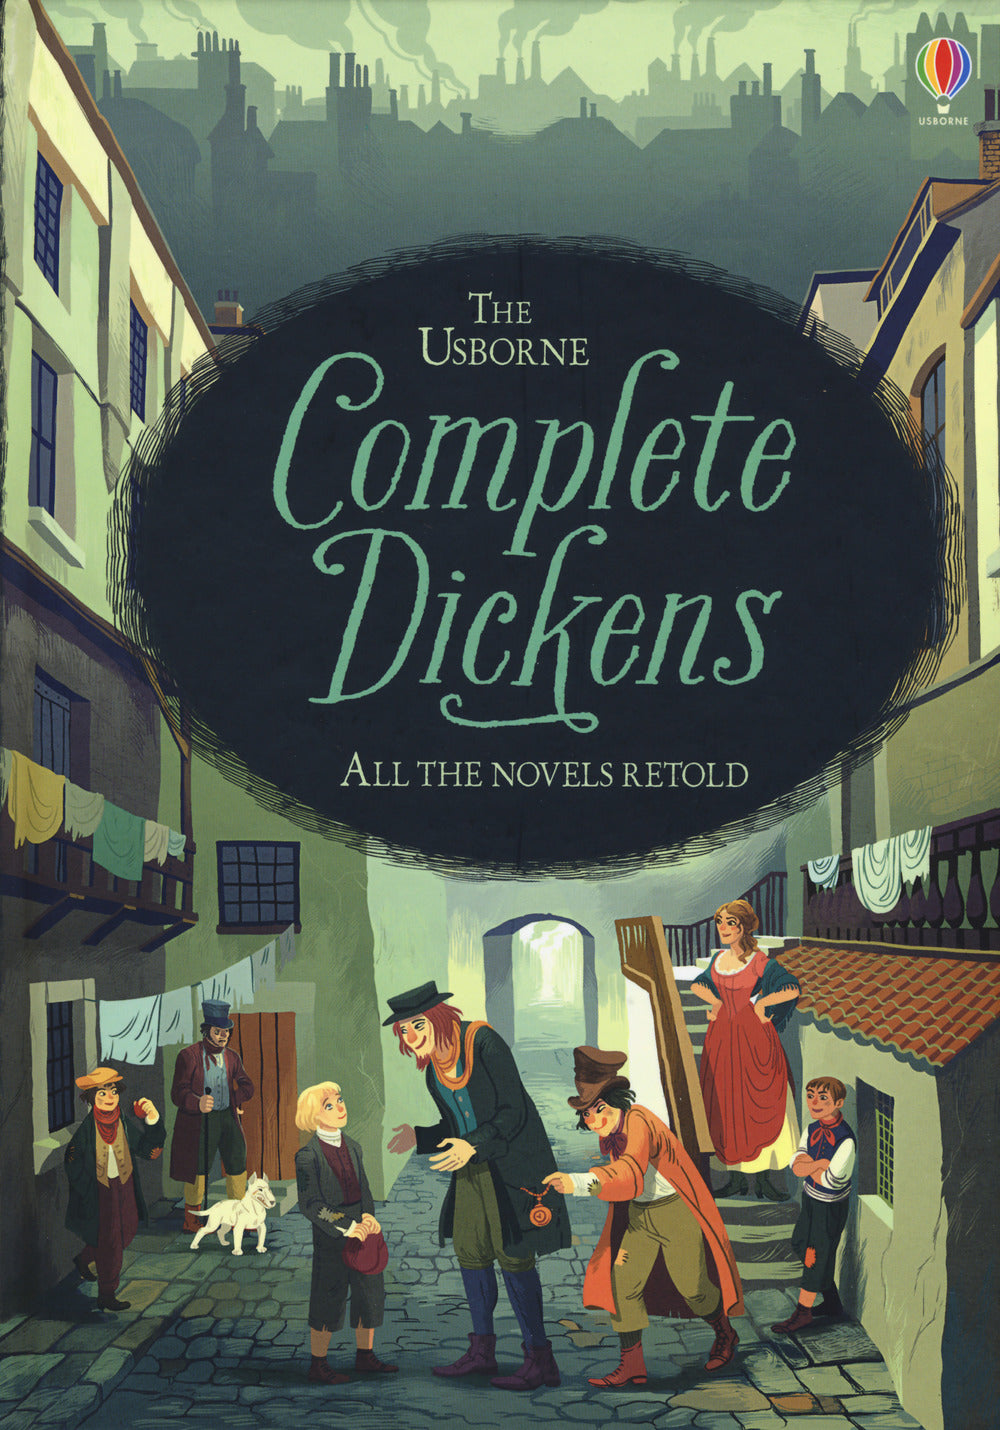 Complete Dickens. All novels retold di Charles Dickens.